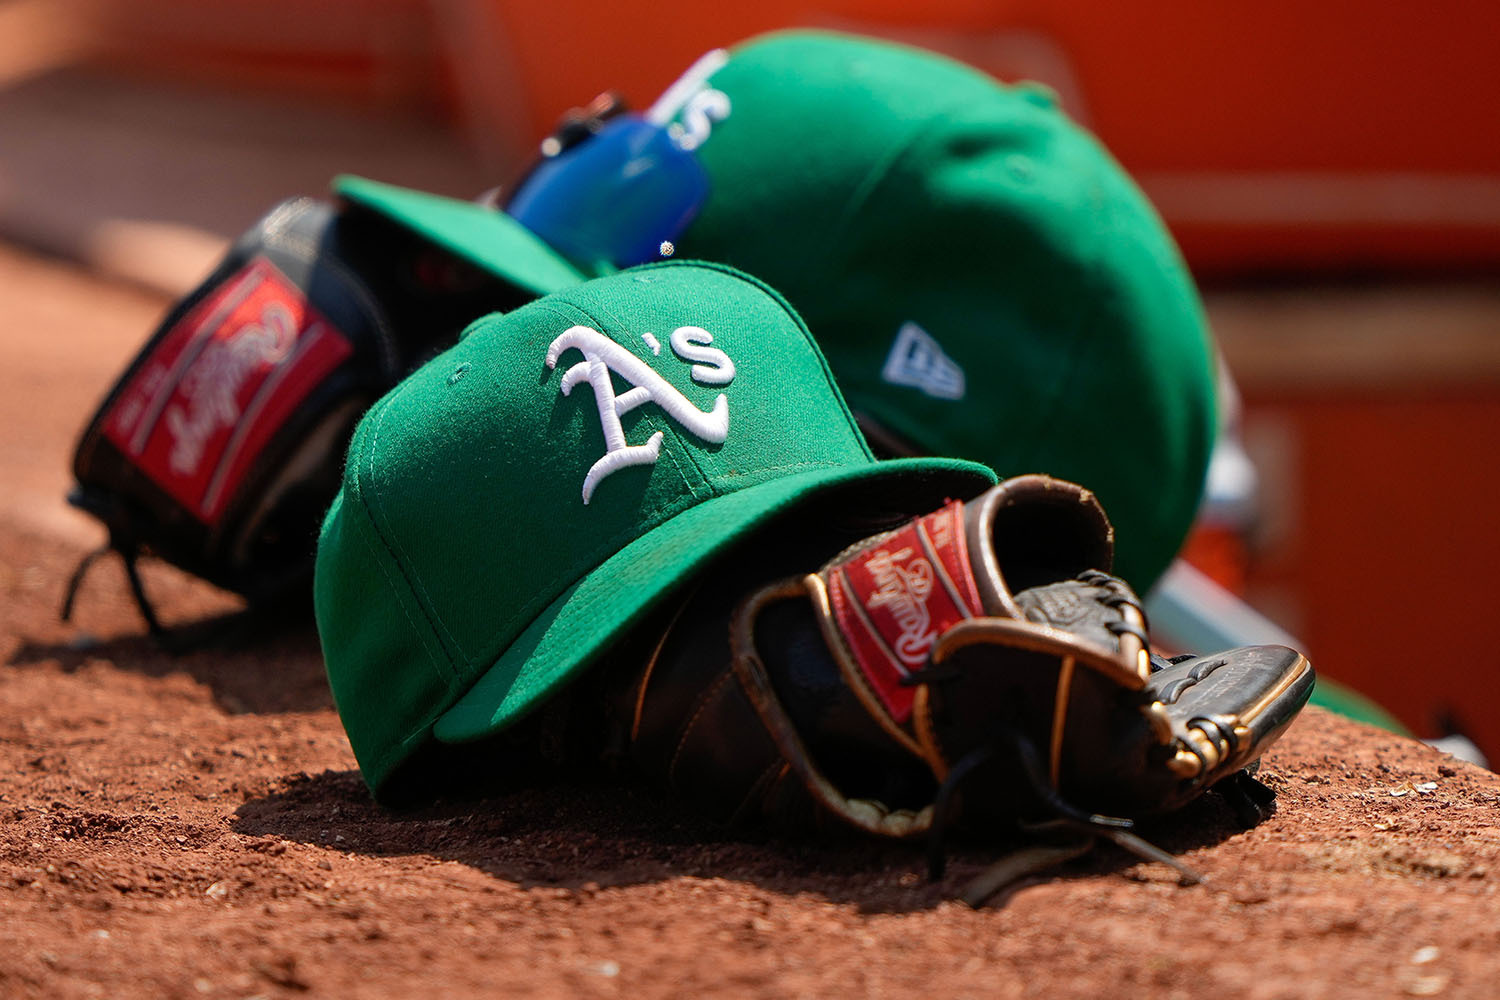 MLB Could Reportedly Waive A’s Relocation Fee